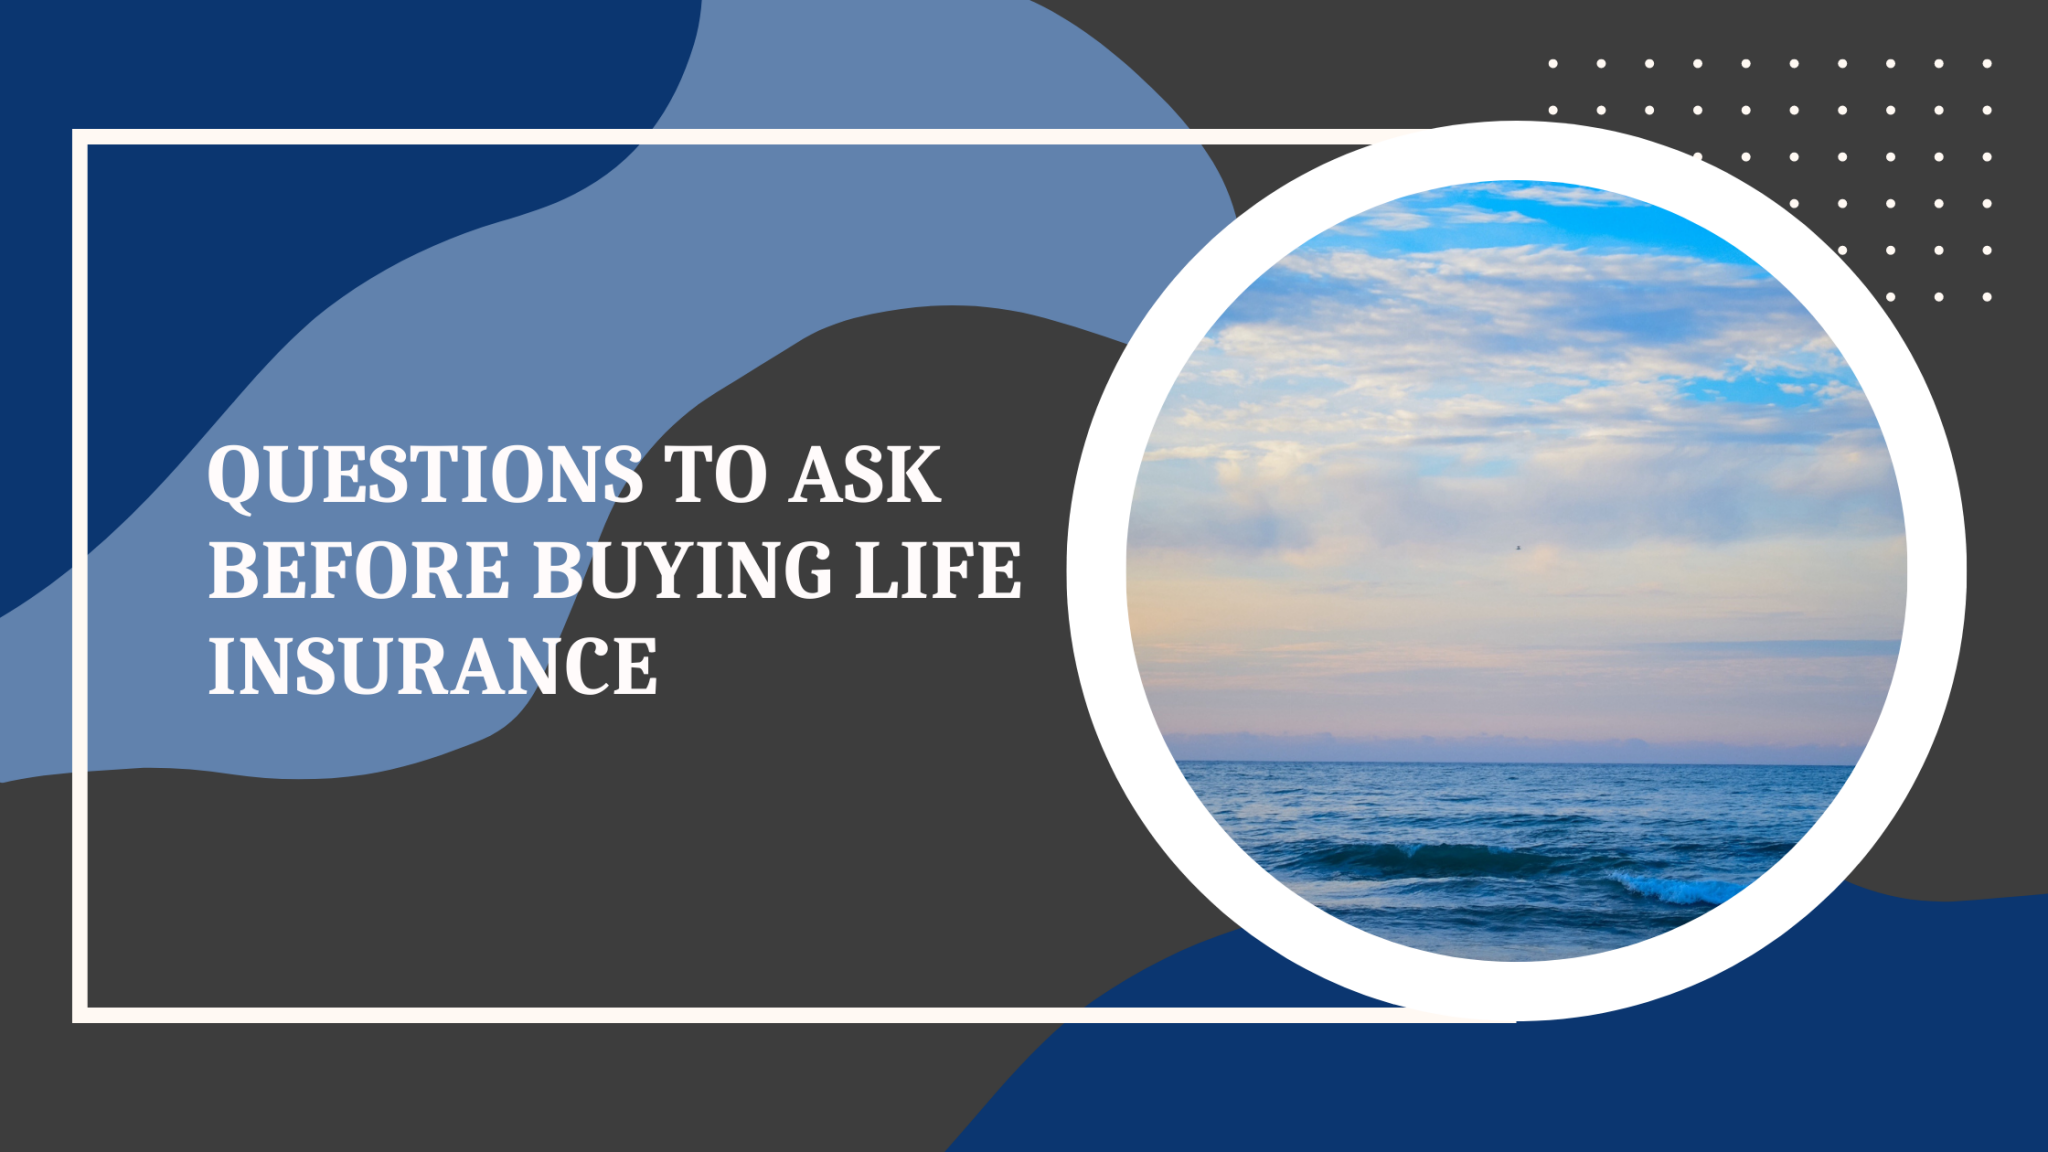 Questions to Ask Before Buying Life Insurance